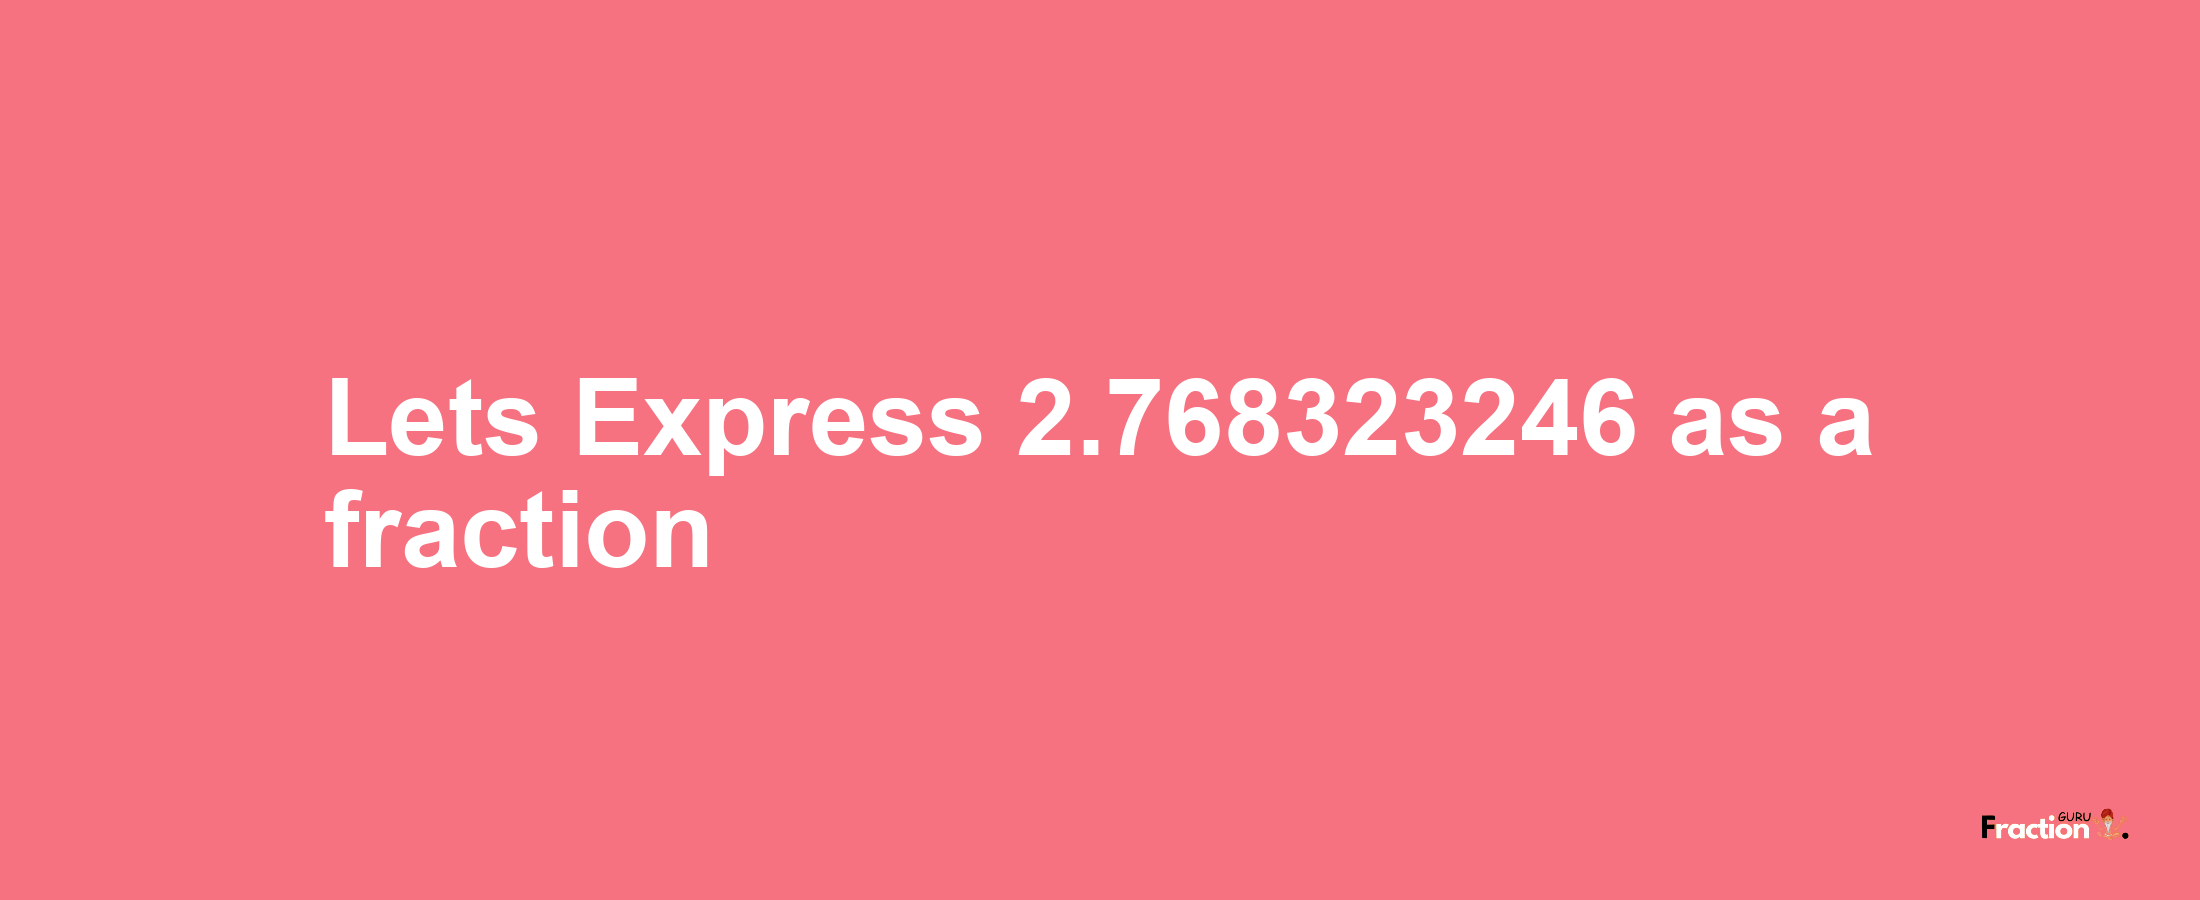 Lets Express 2.768323246 as afraction